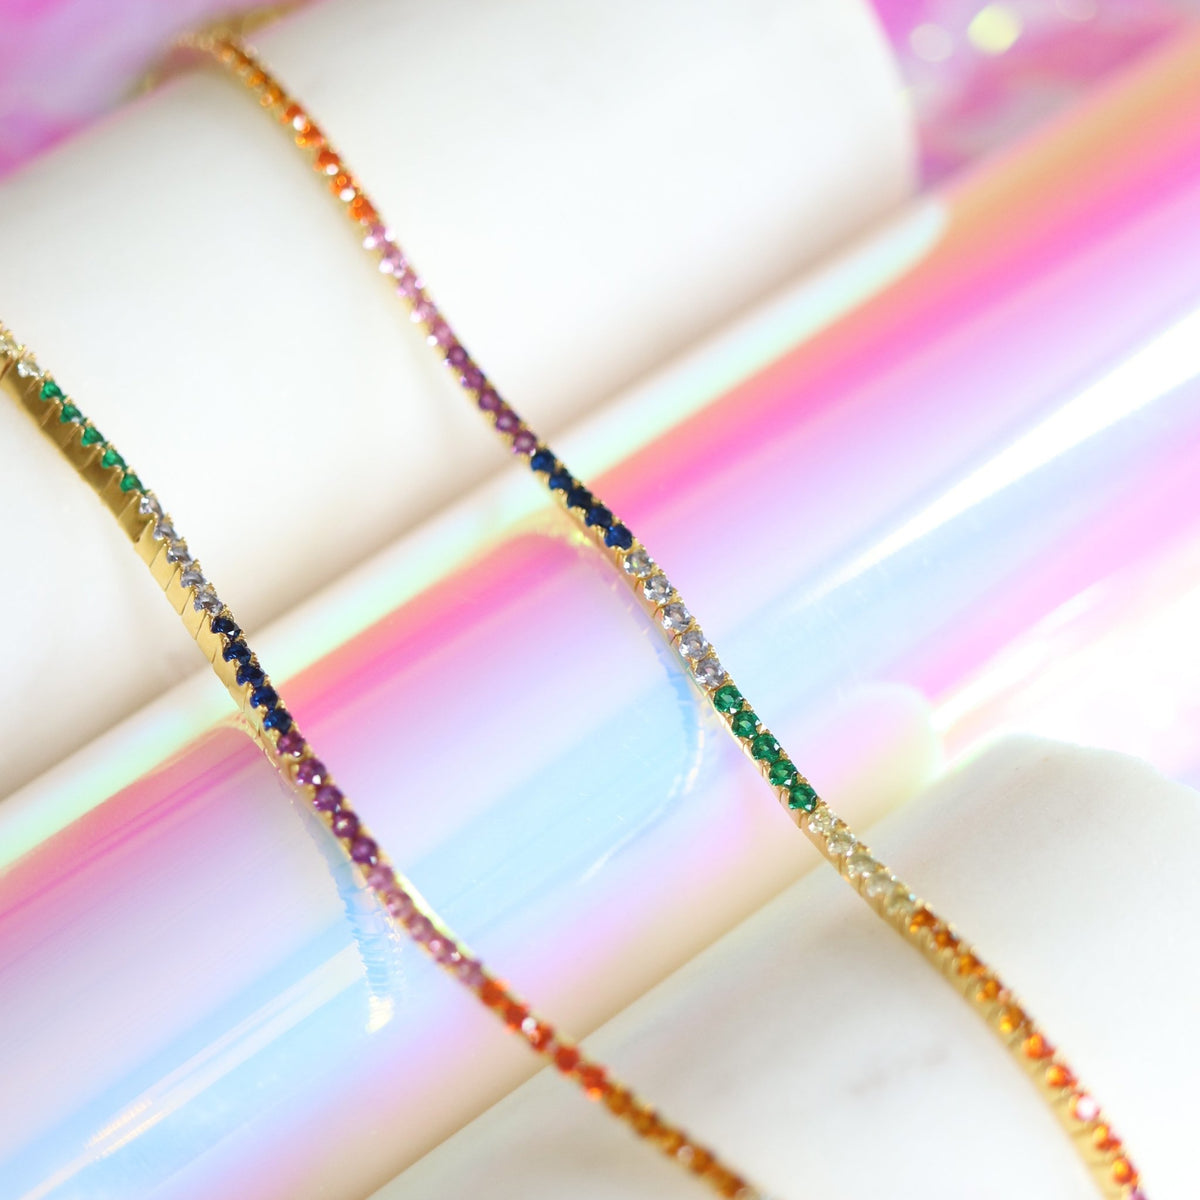 LOVE TENNIS NECKLACE - RAINBOW CUBIC ZIRCONIA &amp; GOLD - SO PRETTY CARA COTTER